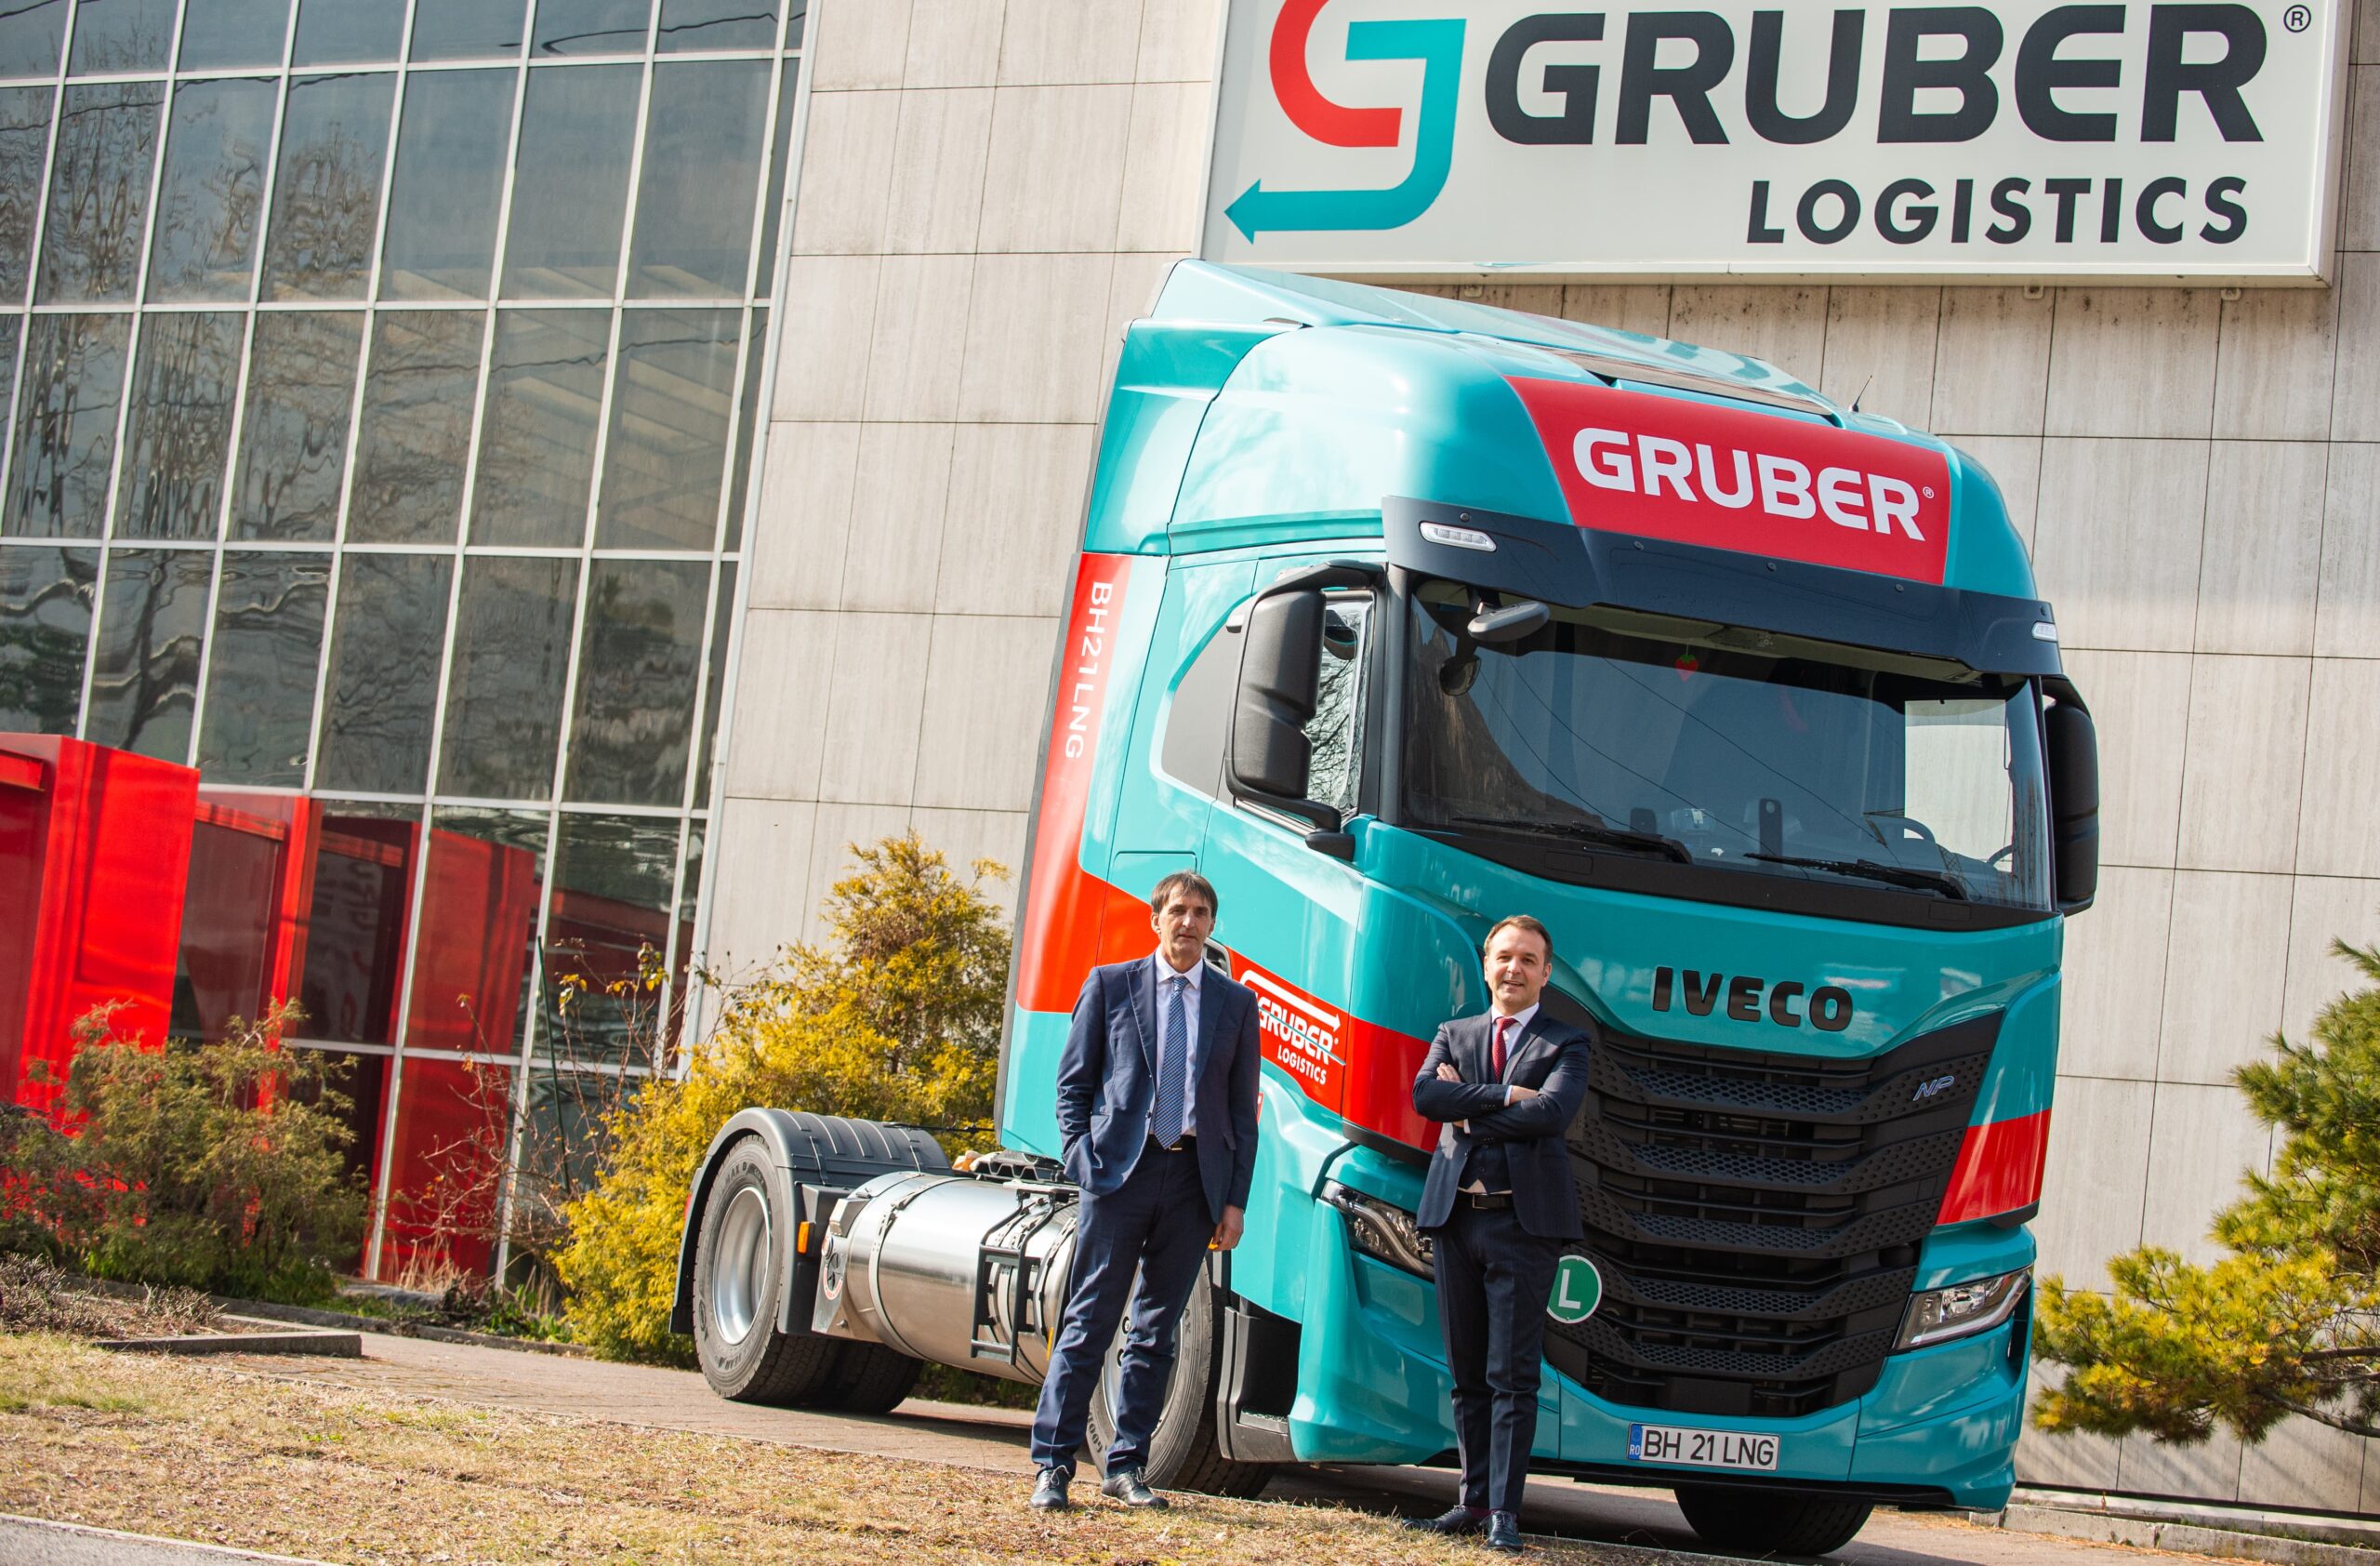 It’s official: in 2021 GRUBER Logistics has grown by 28%!